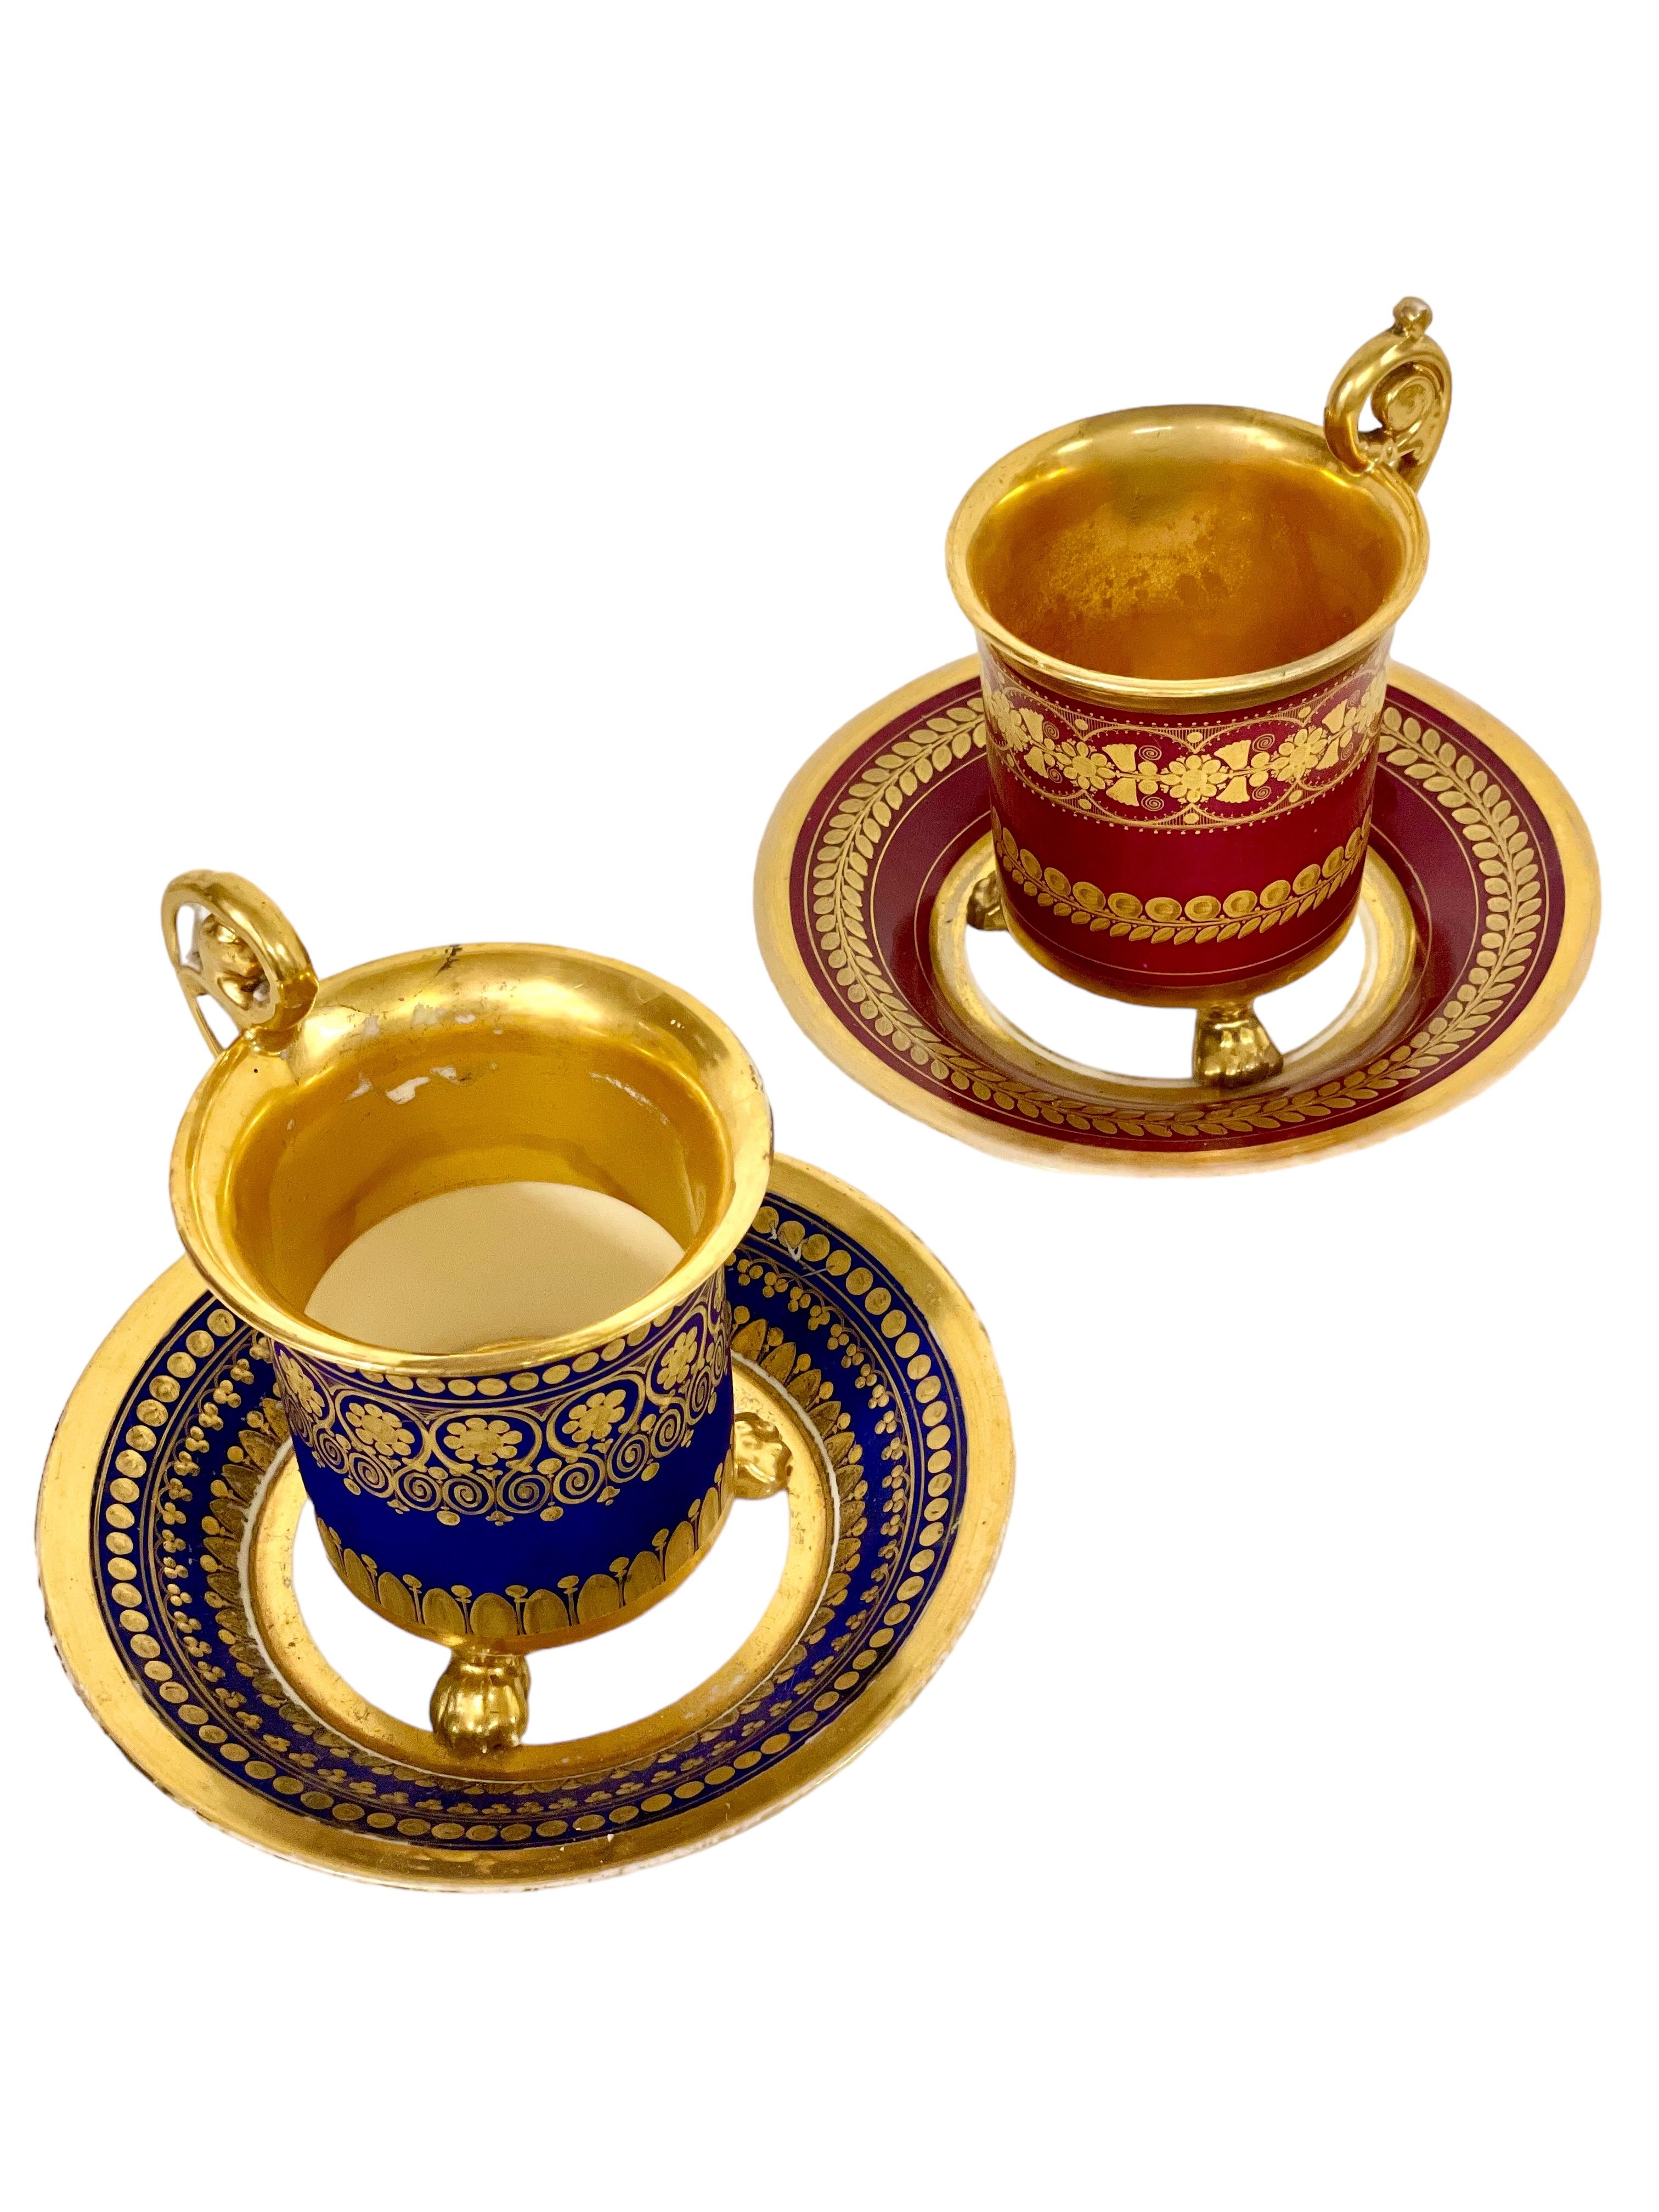 Pair of Paris Porcelain Three-Footed Gilded Coffee Cups. Empire Period For Sale 13